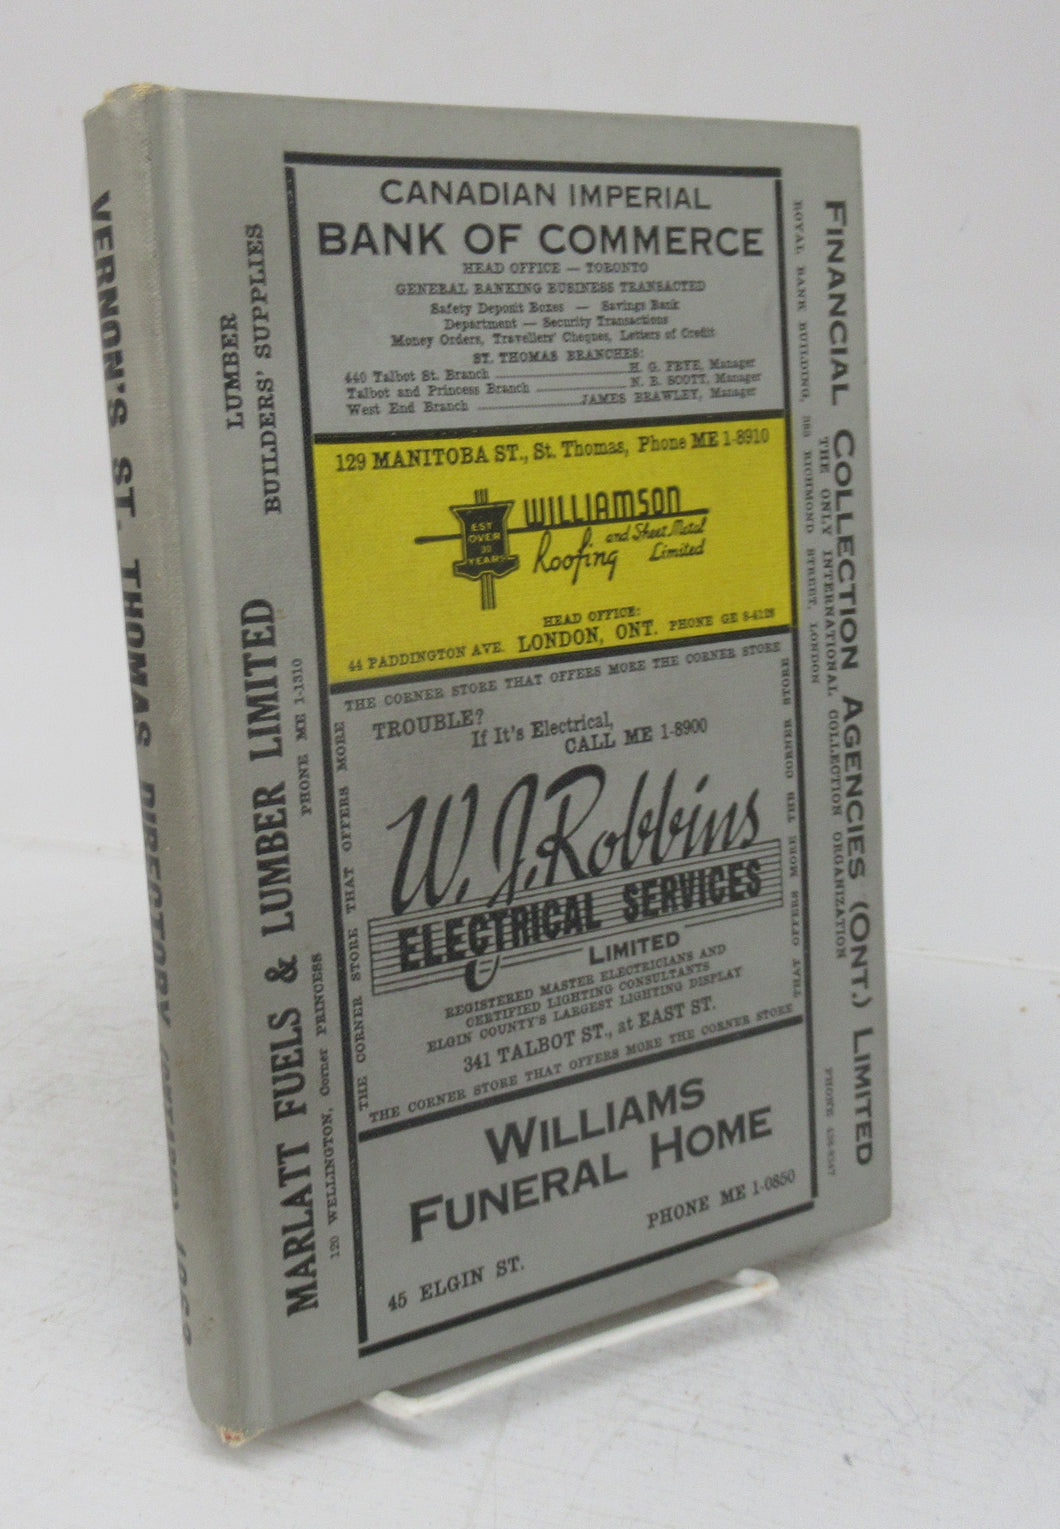 Vernon's City of St. Thomas (Ontario) Miscellaneous, Business, Alphabetical and Street Directory for the year 1963